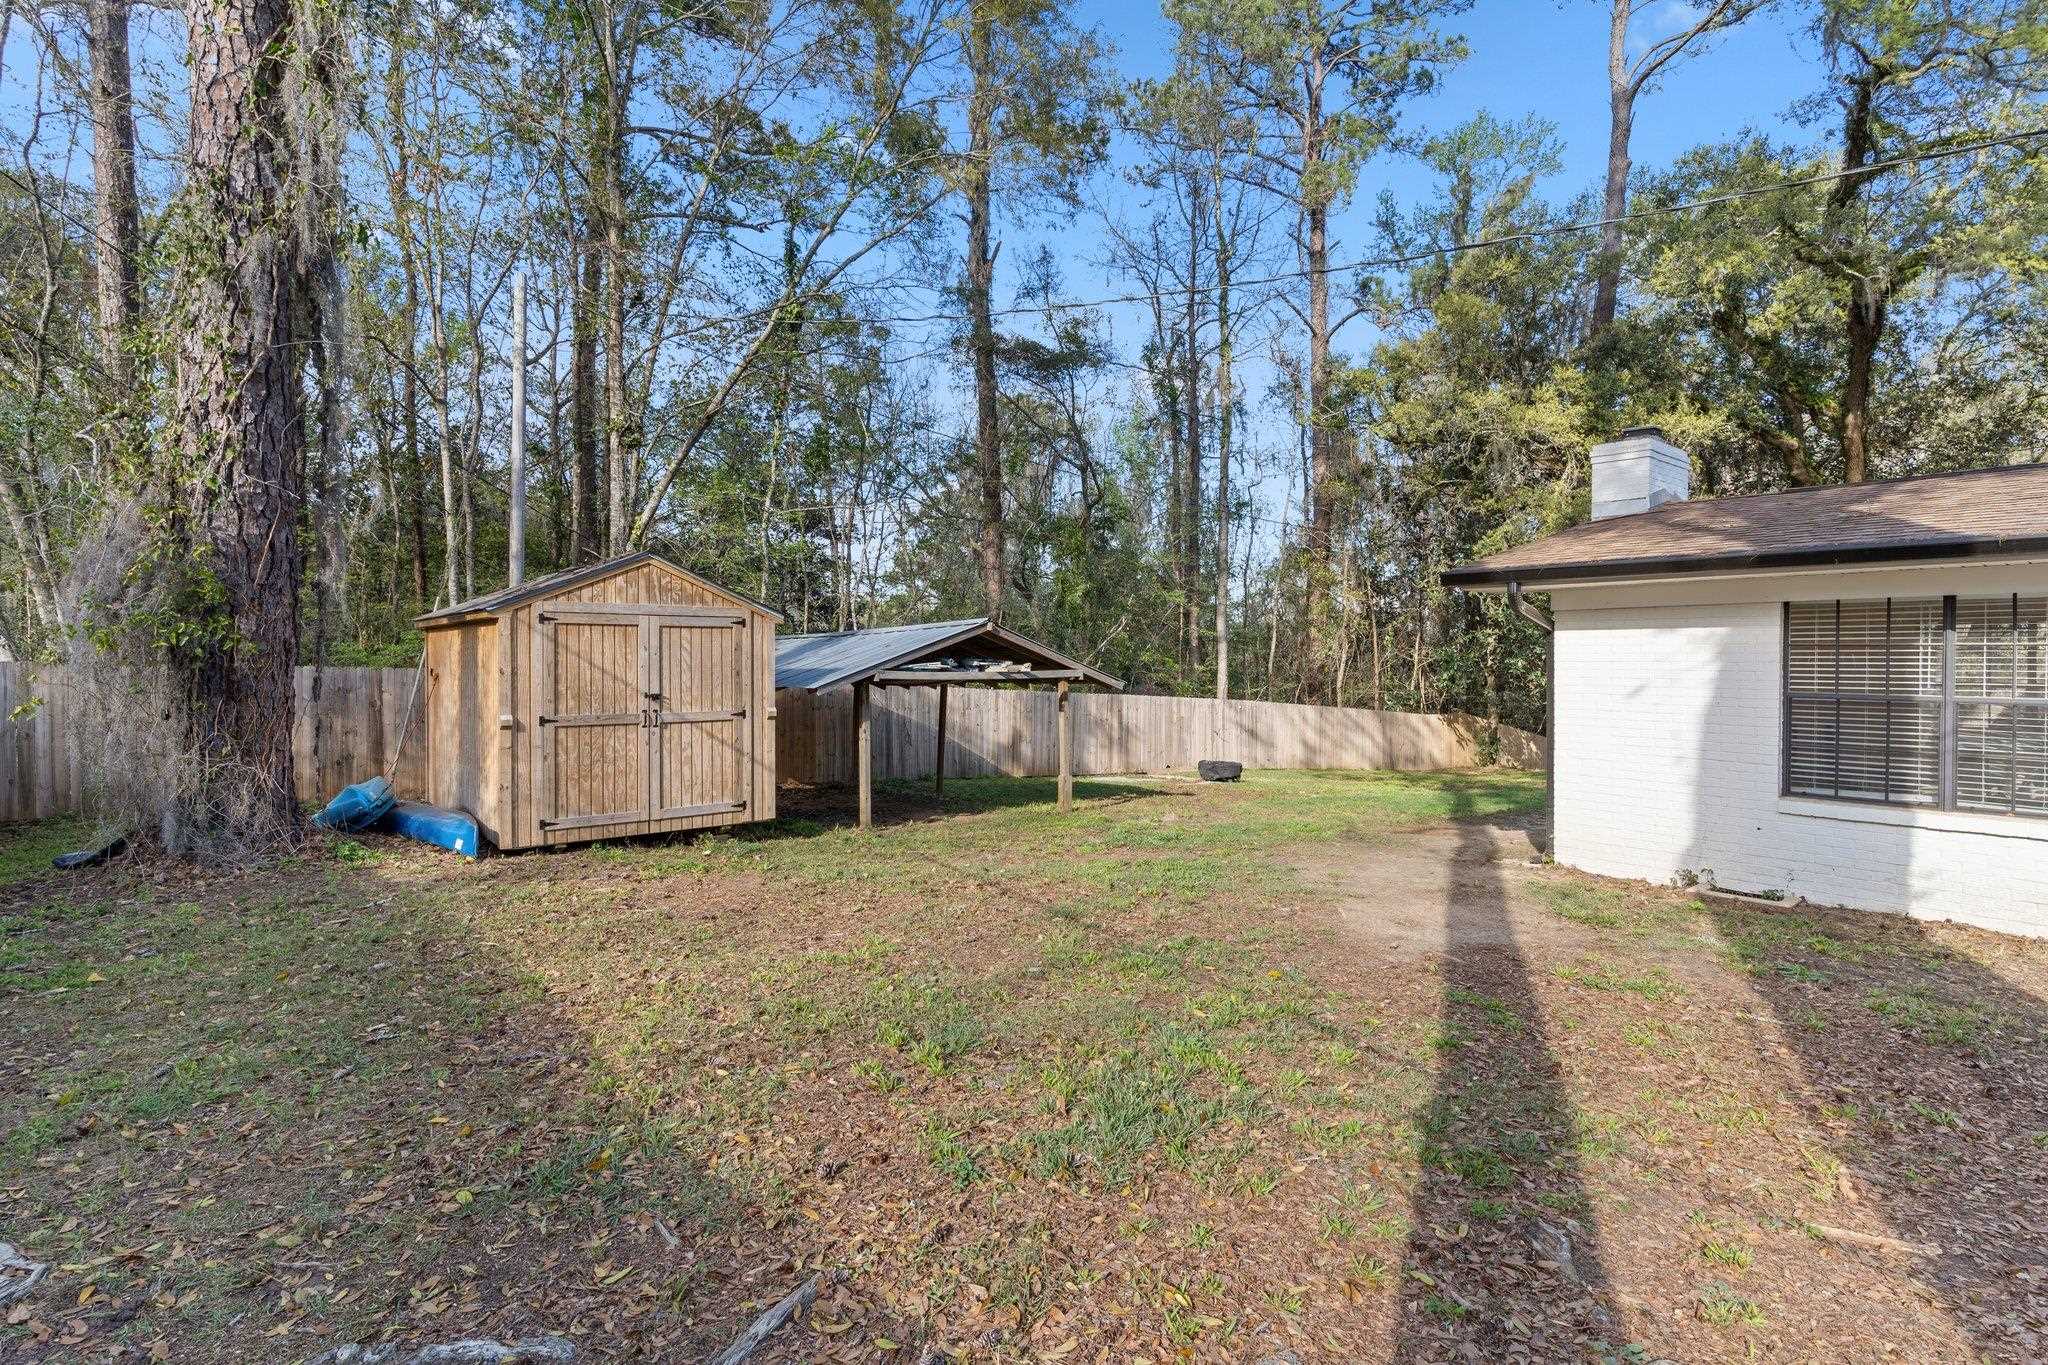 1614 TALPECO RD,TALLAHASSEE,Florida 32303,3 Bedrooms Bedrooms,2 BathroomsBathrooms,Detached single family,1614 TALPECO RD,369608